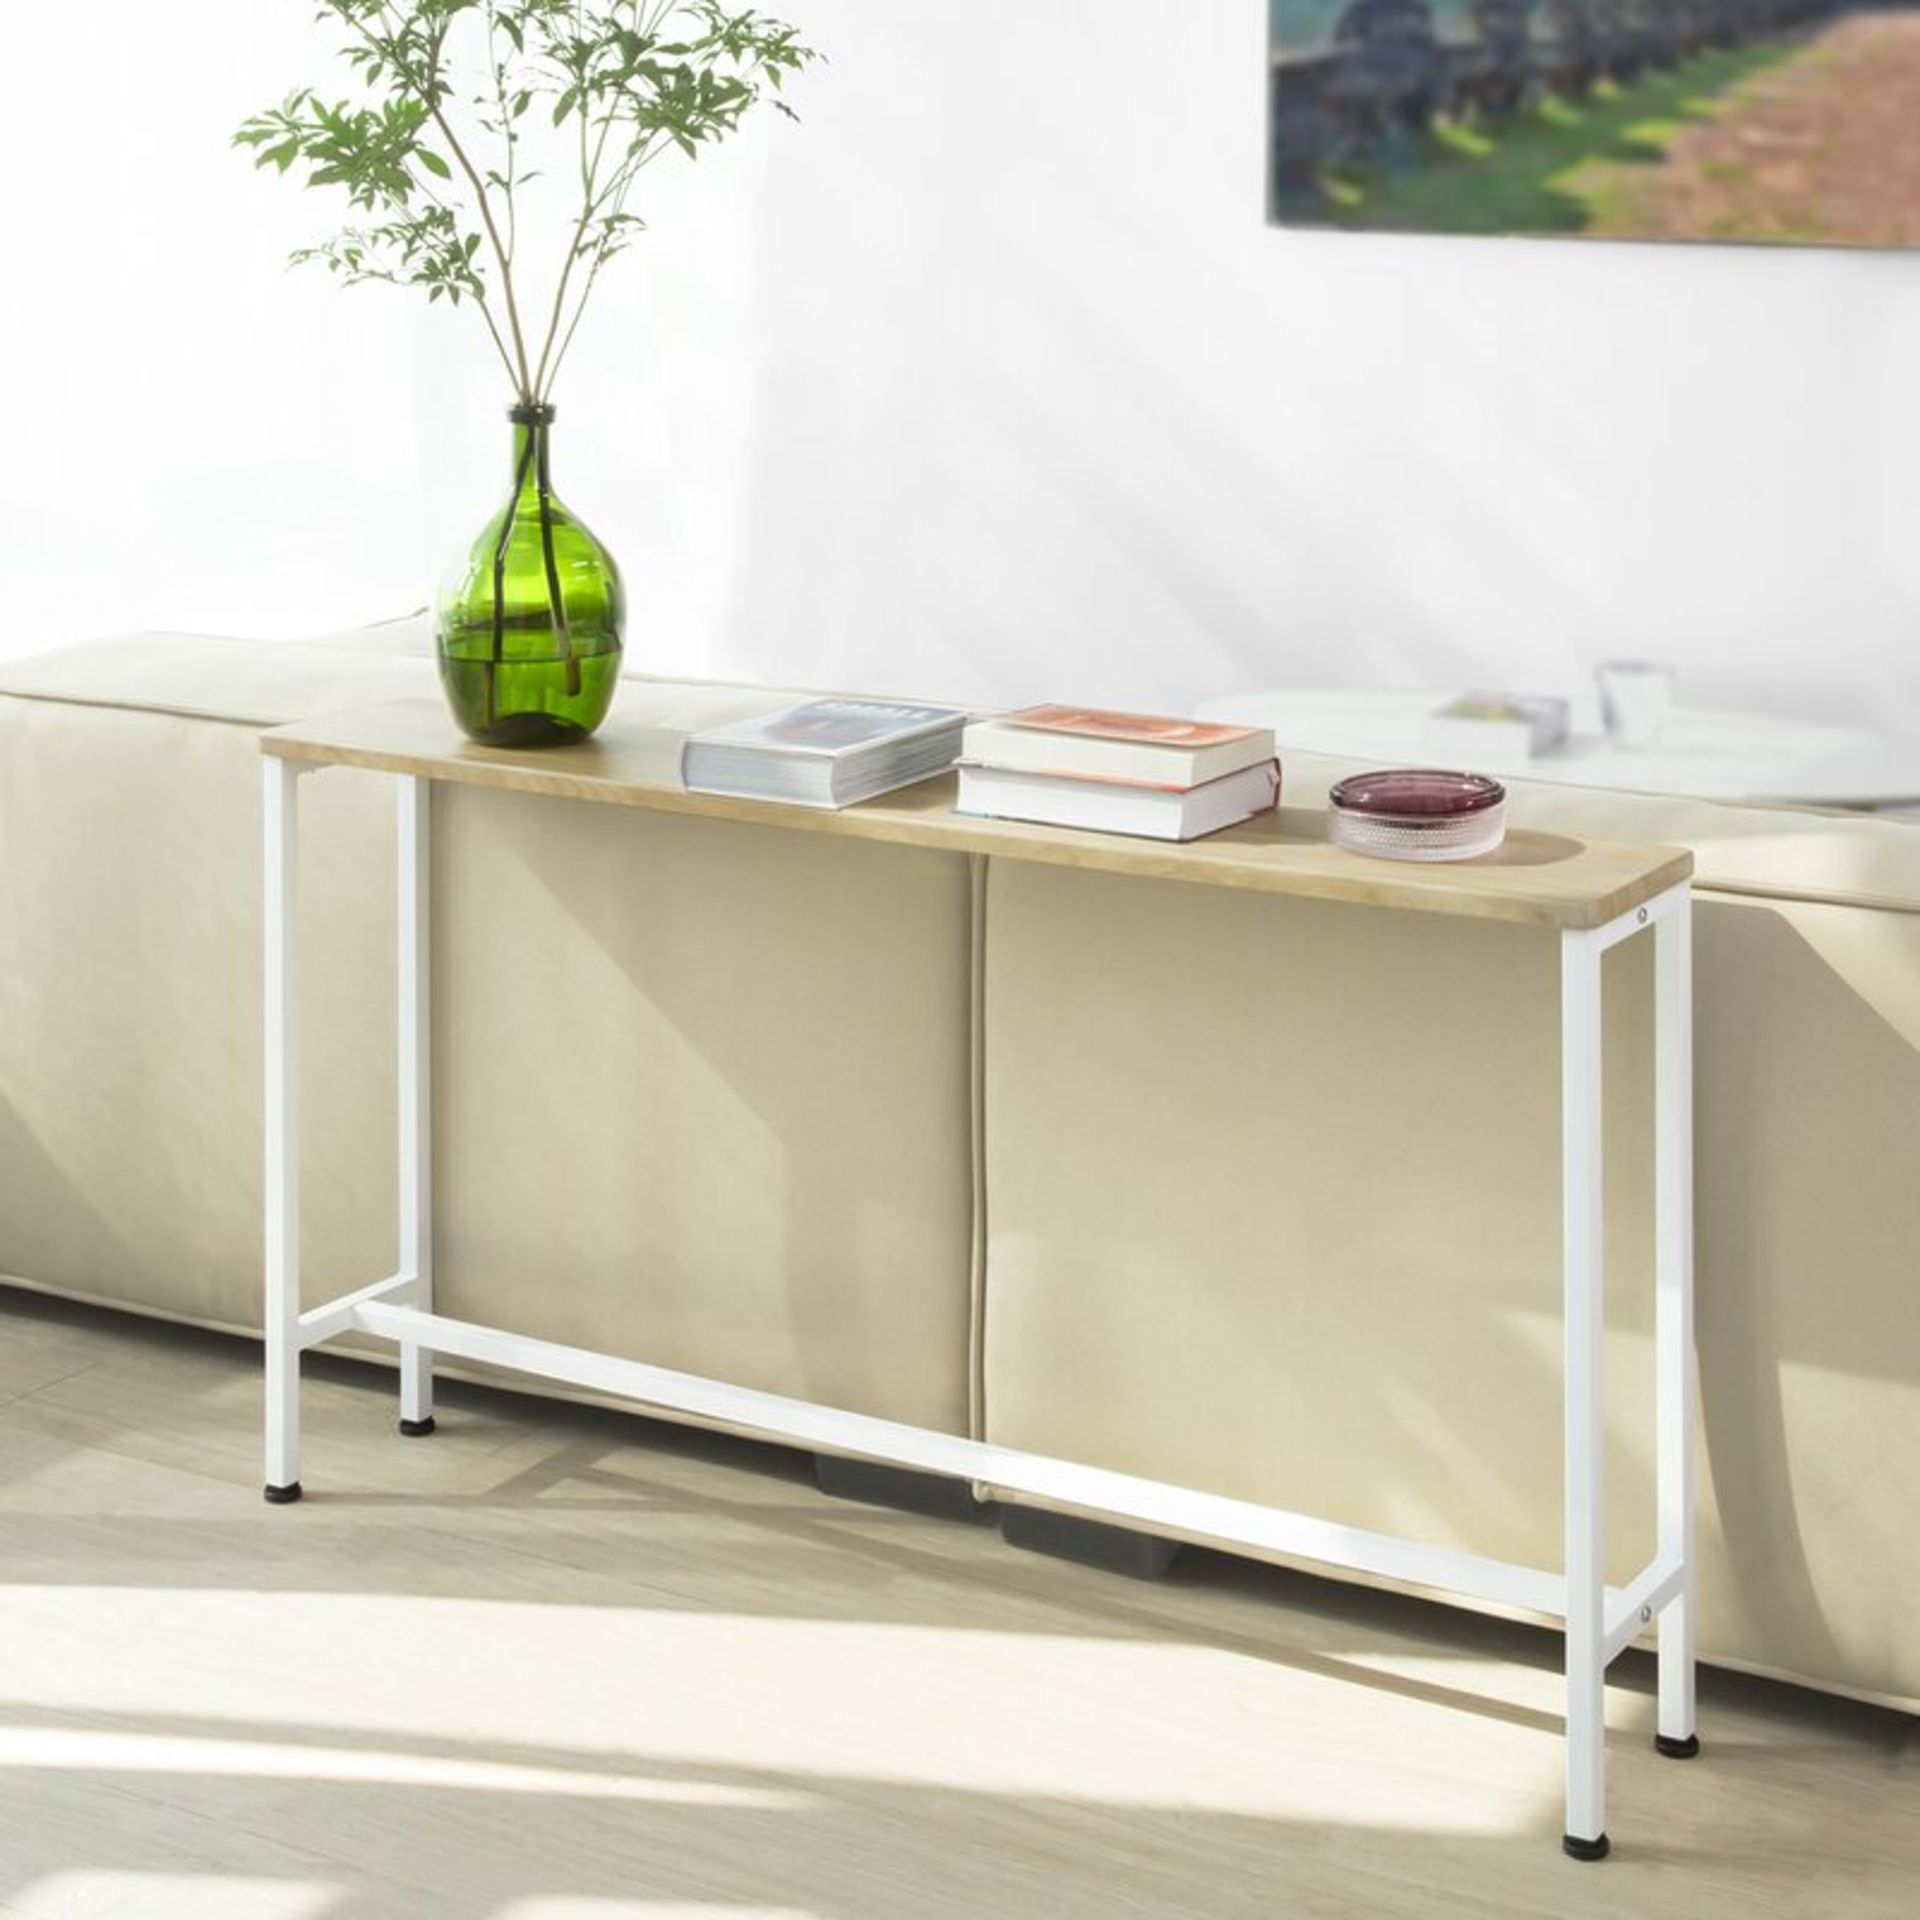 Darsy 120Cm Console Table - RRP £115.99 - Image 3 of 3